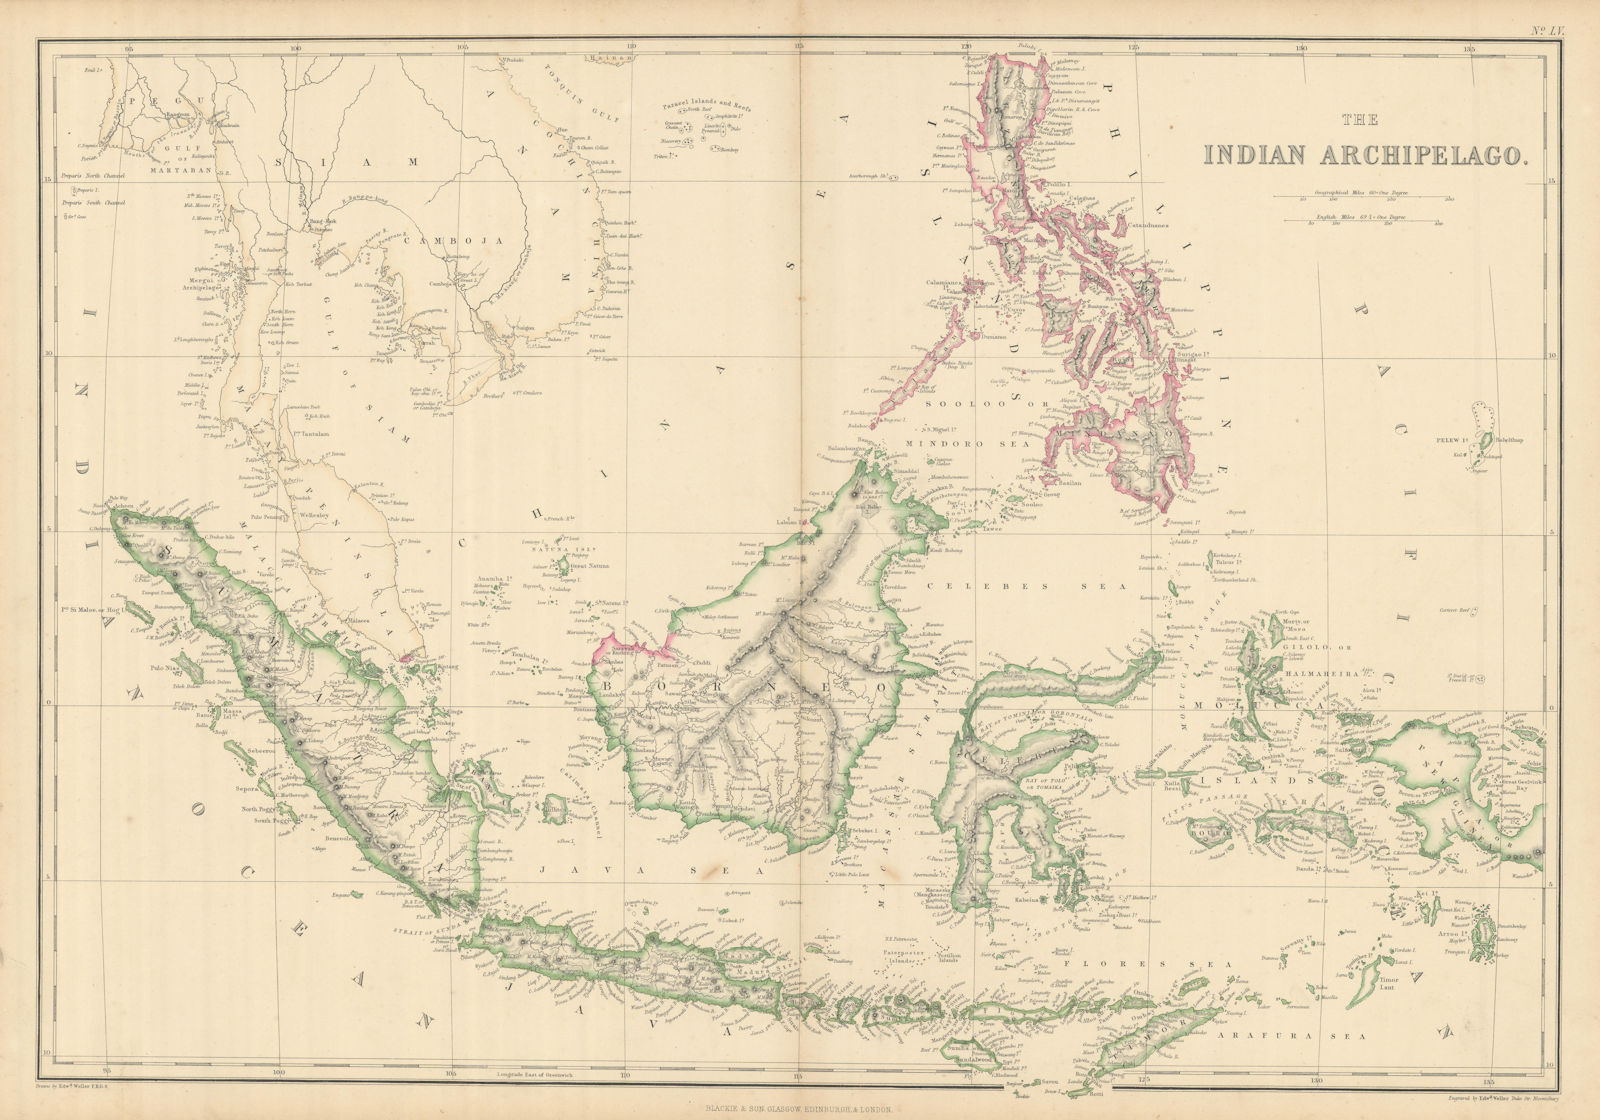 The Indian Archipelago. East Indies Indonesia Philippines. WELLER 1860 old map